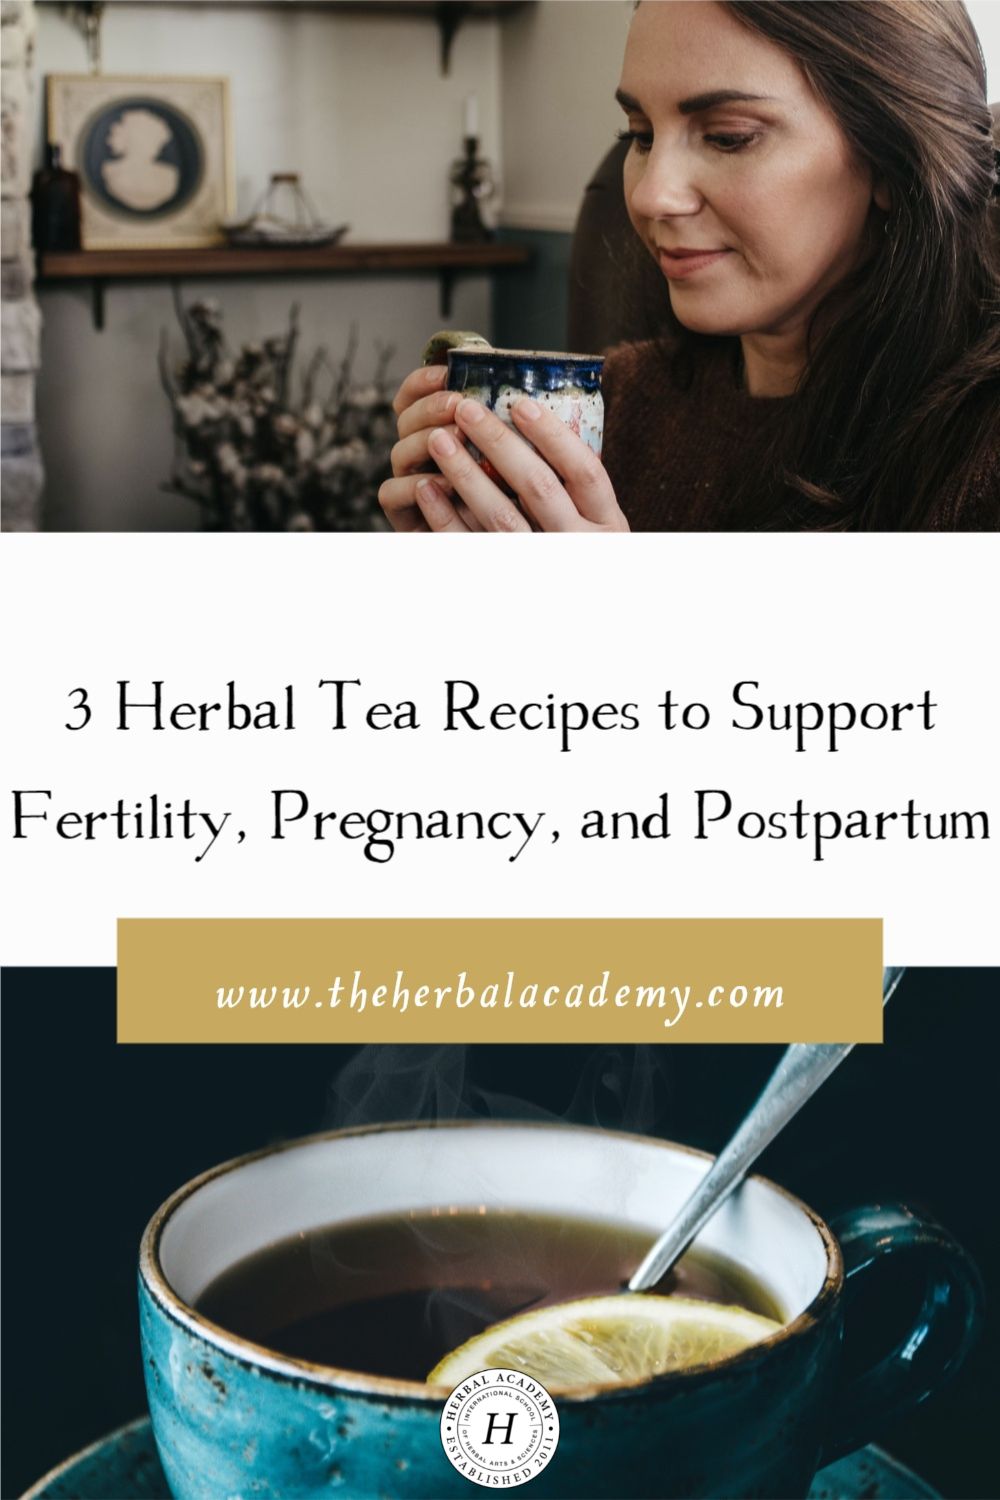 3 Herbal Tea Recipes to Support Fertility, Pregnancy, and Postpartum | Herbal Academy | Put the kettle on, because these herbal tea recipes are wonderful options for nourishing herbs during pregnancy, lactation, and postpartum.